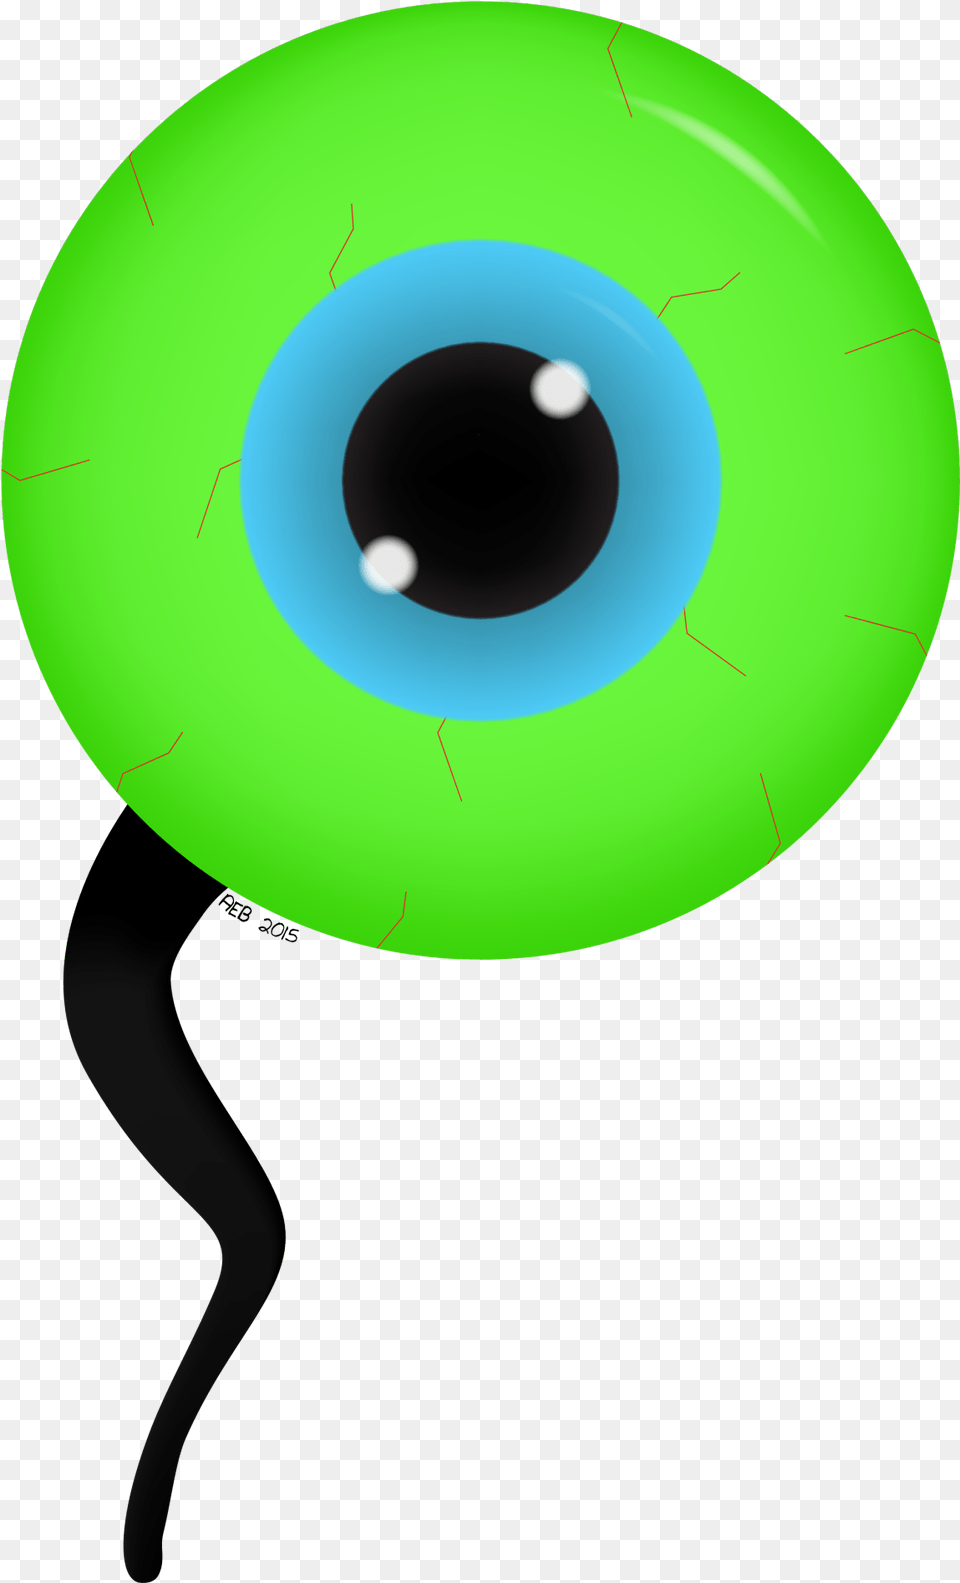 Sam The Septic Eye The Mascot Of Youtube Lets Player Sam Septiceye Transparent, Balloon, Alien, Disk Png Image